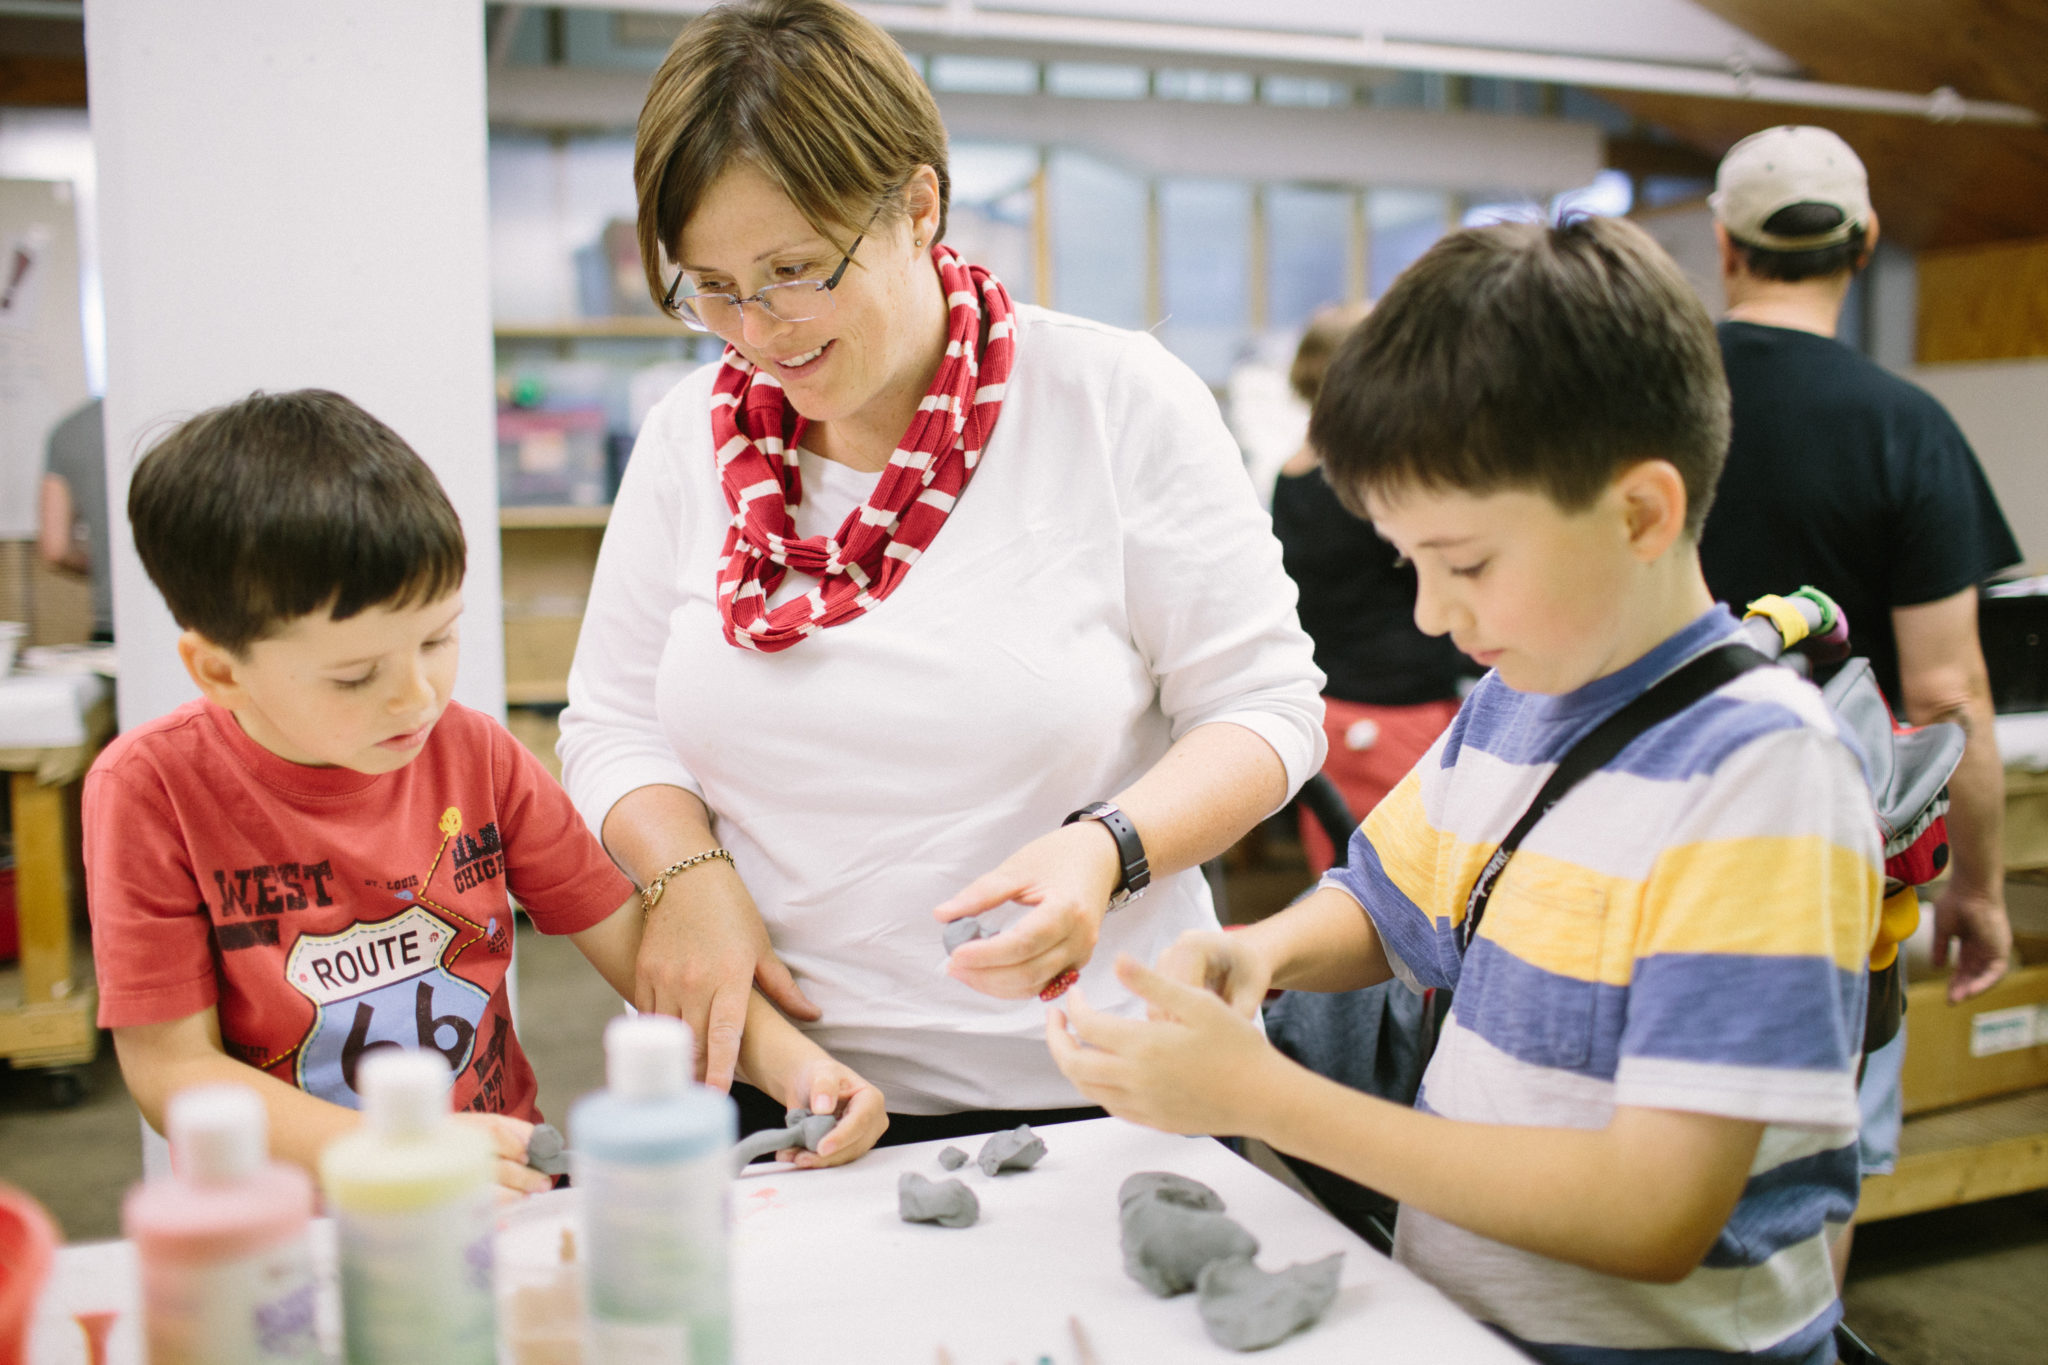 Kids work with modeling clay at a "maker party," part of the 2014 City of Learning.